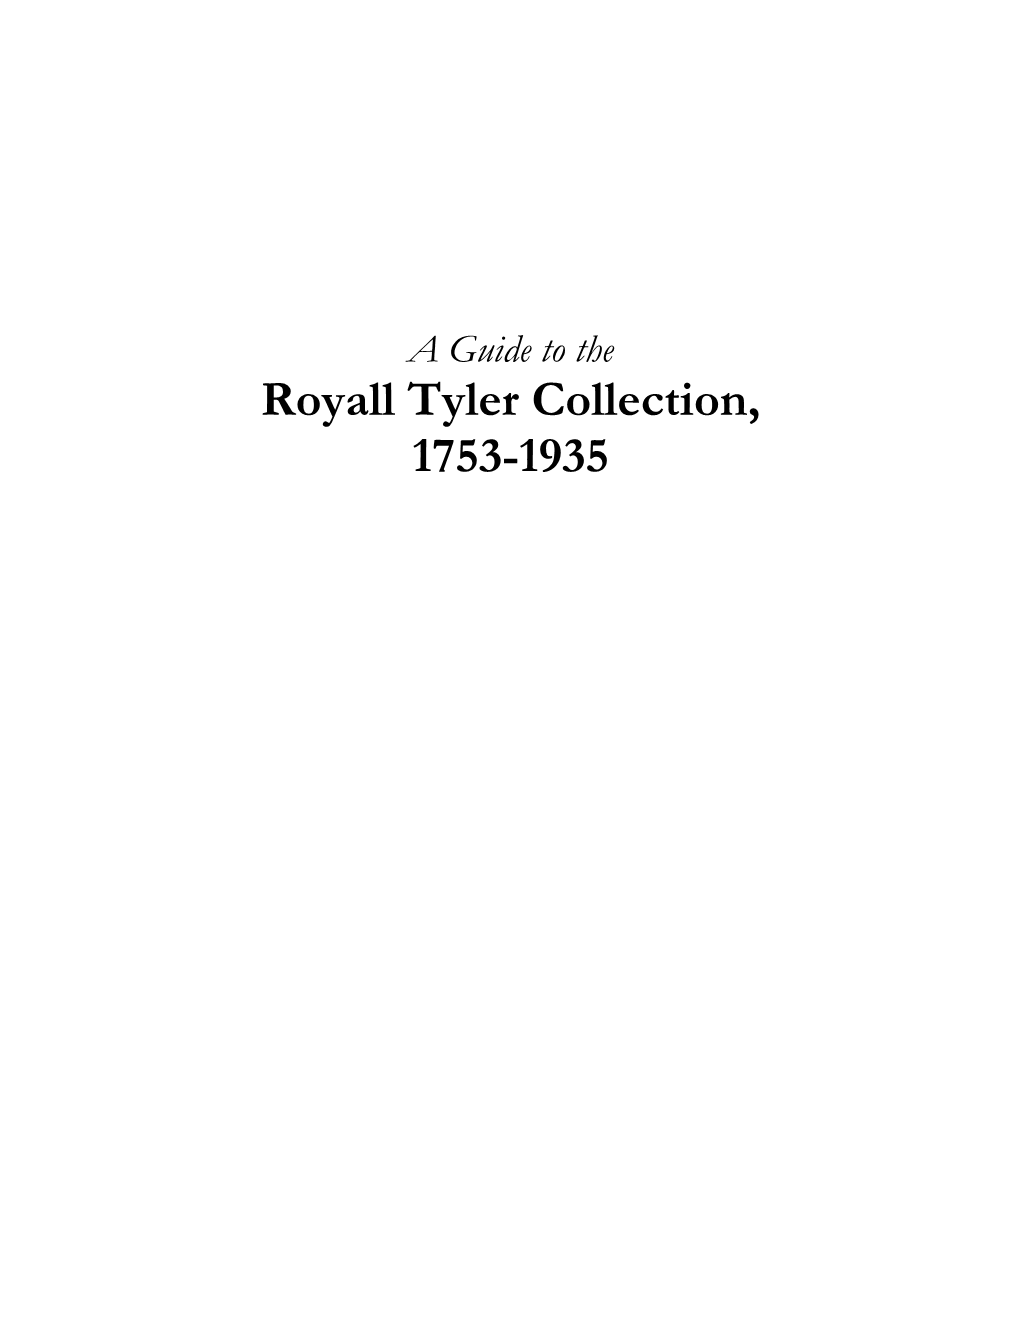 I. Royall Tyler Papers 8 II